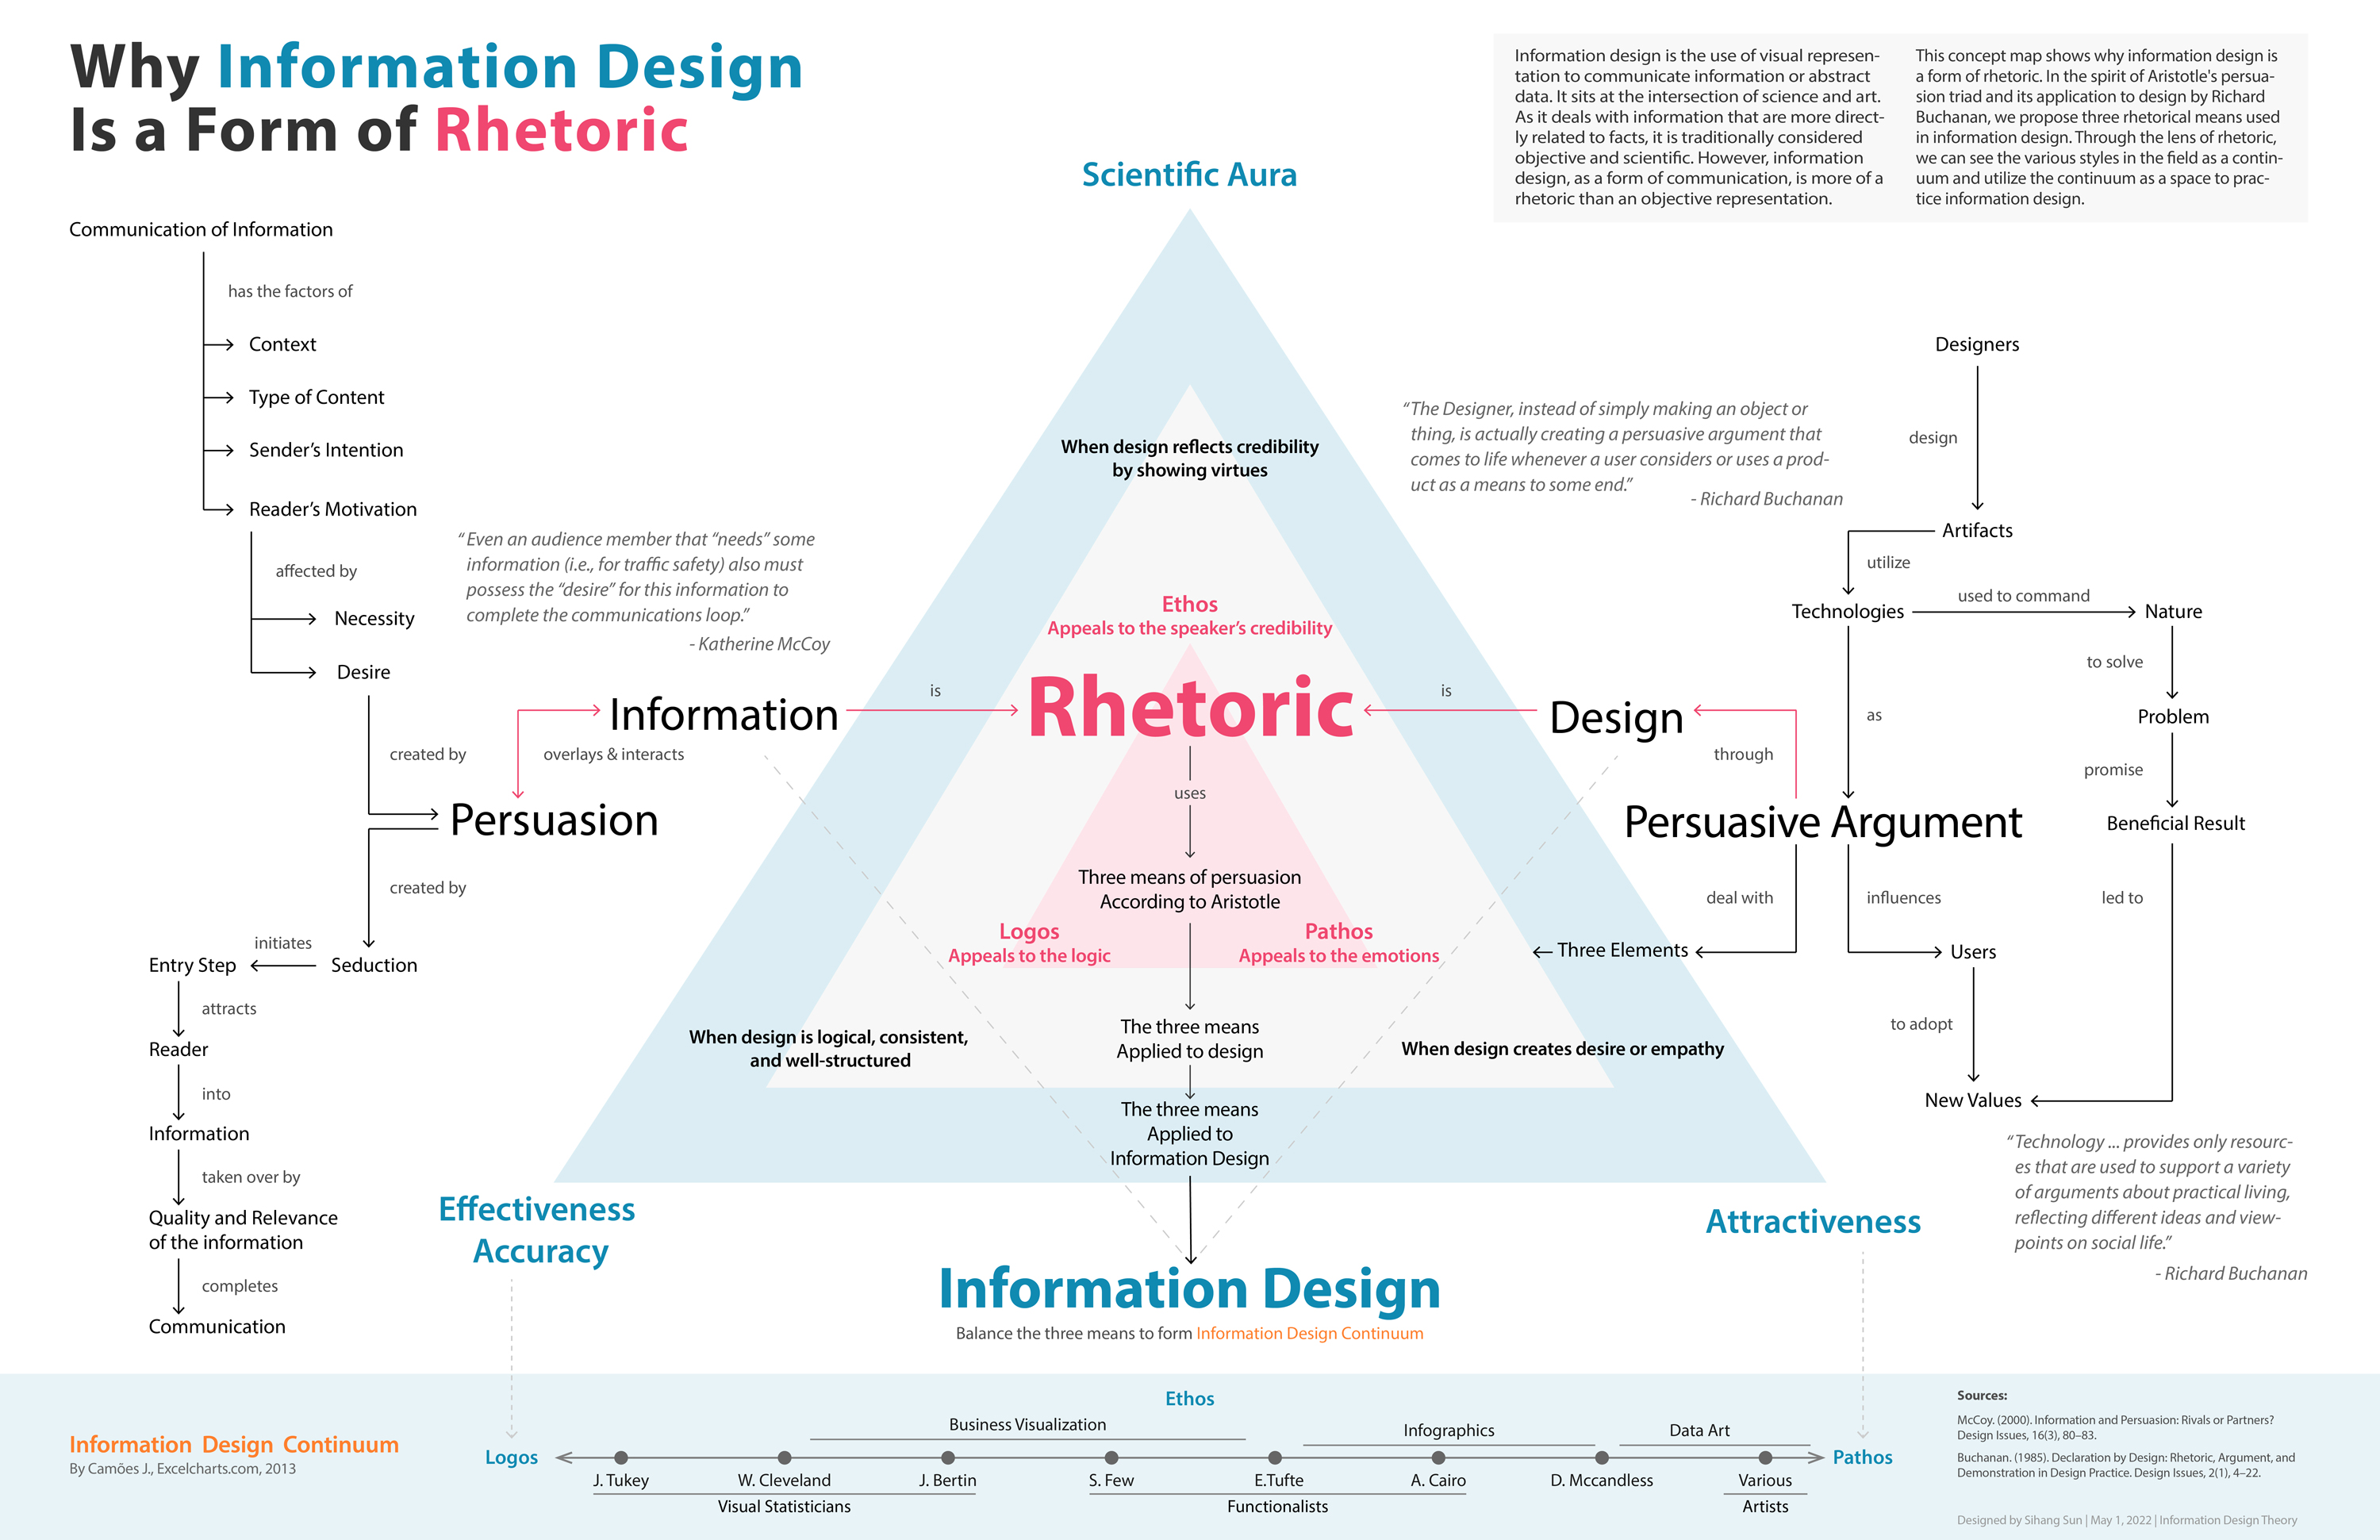 A concept map shows why information design is a form of rhetoric and proposes three rhetorical means used in information design.